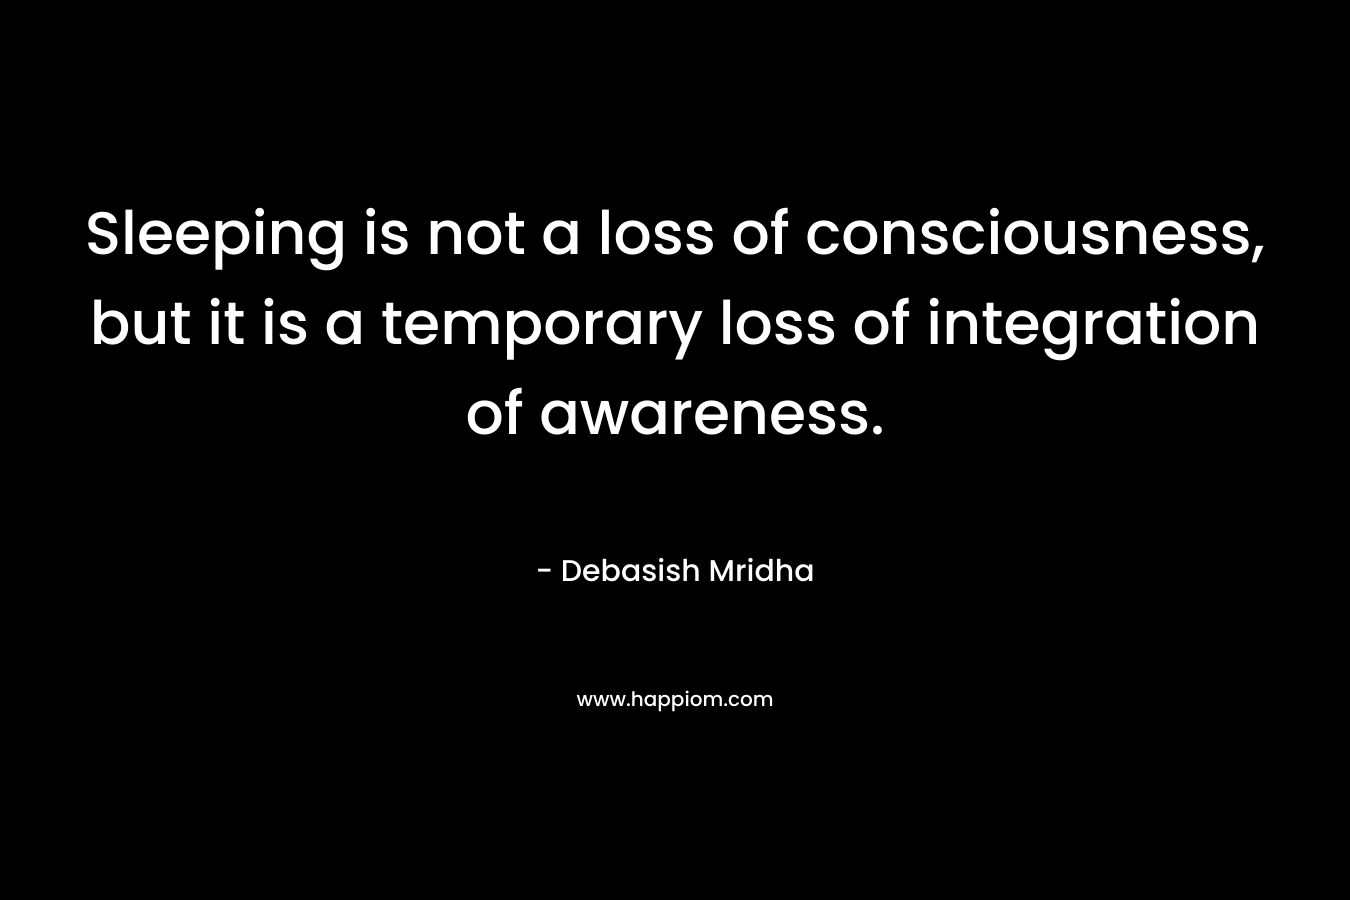 Sleeping is not a loss of consciousness, but it is a temporary loss of integration of awareness. – Debasish Mridha